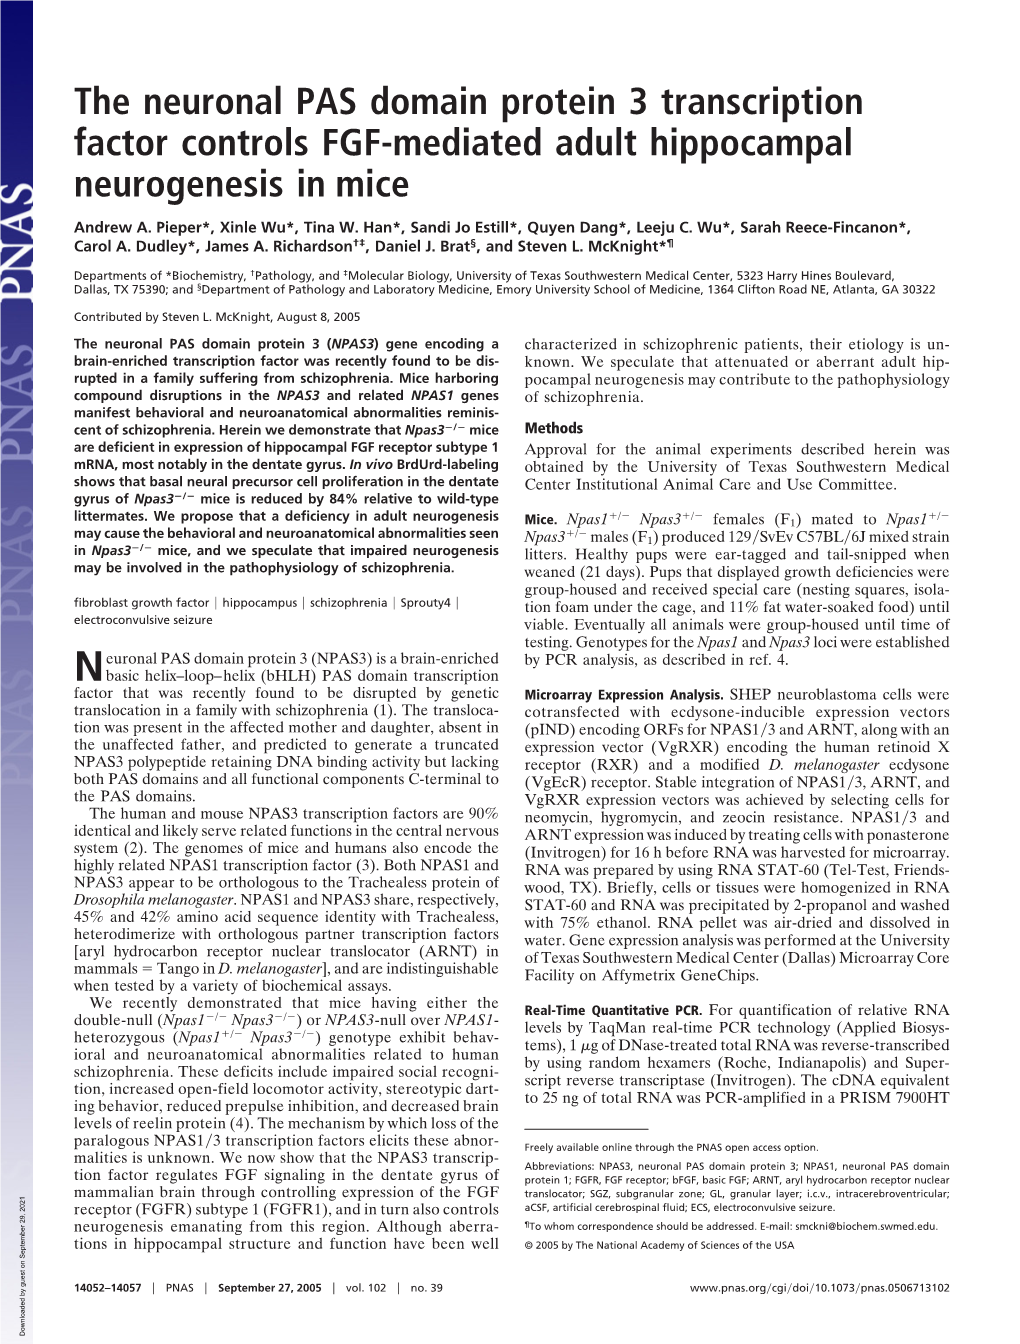 The Neuronal PAS Domain Protein 3 Transcription Factor Controls FGF-Mediated Adult Hippocampal Neurogenesis in Mice